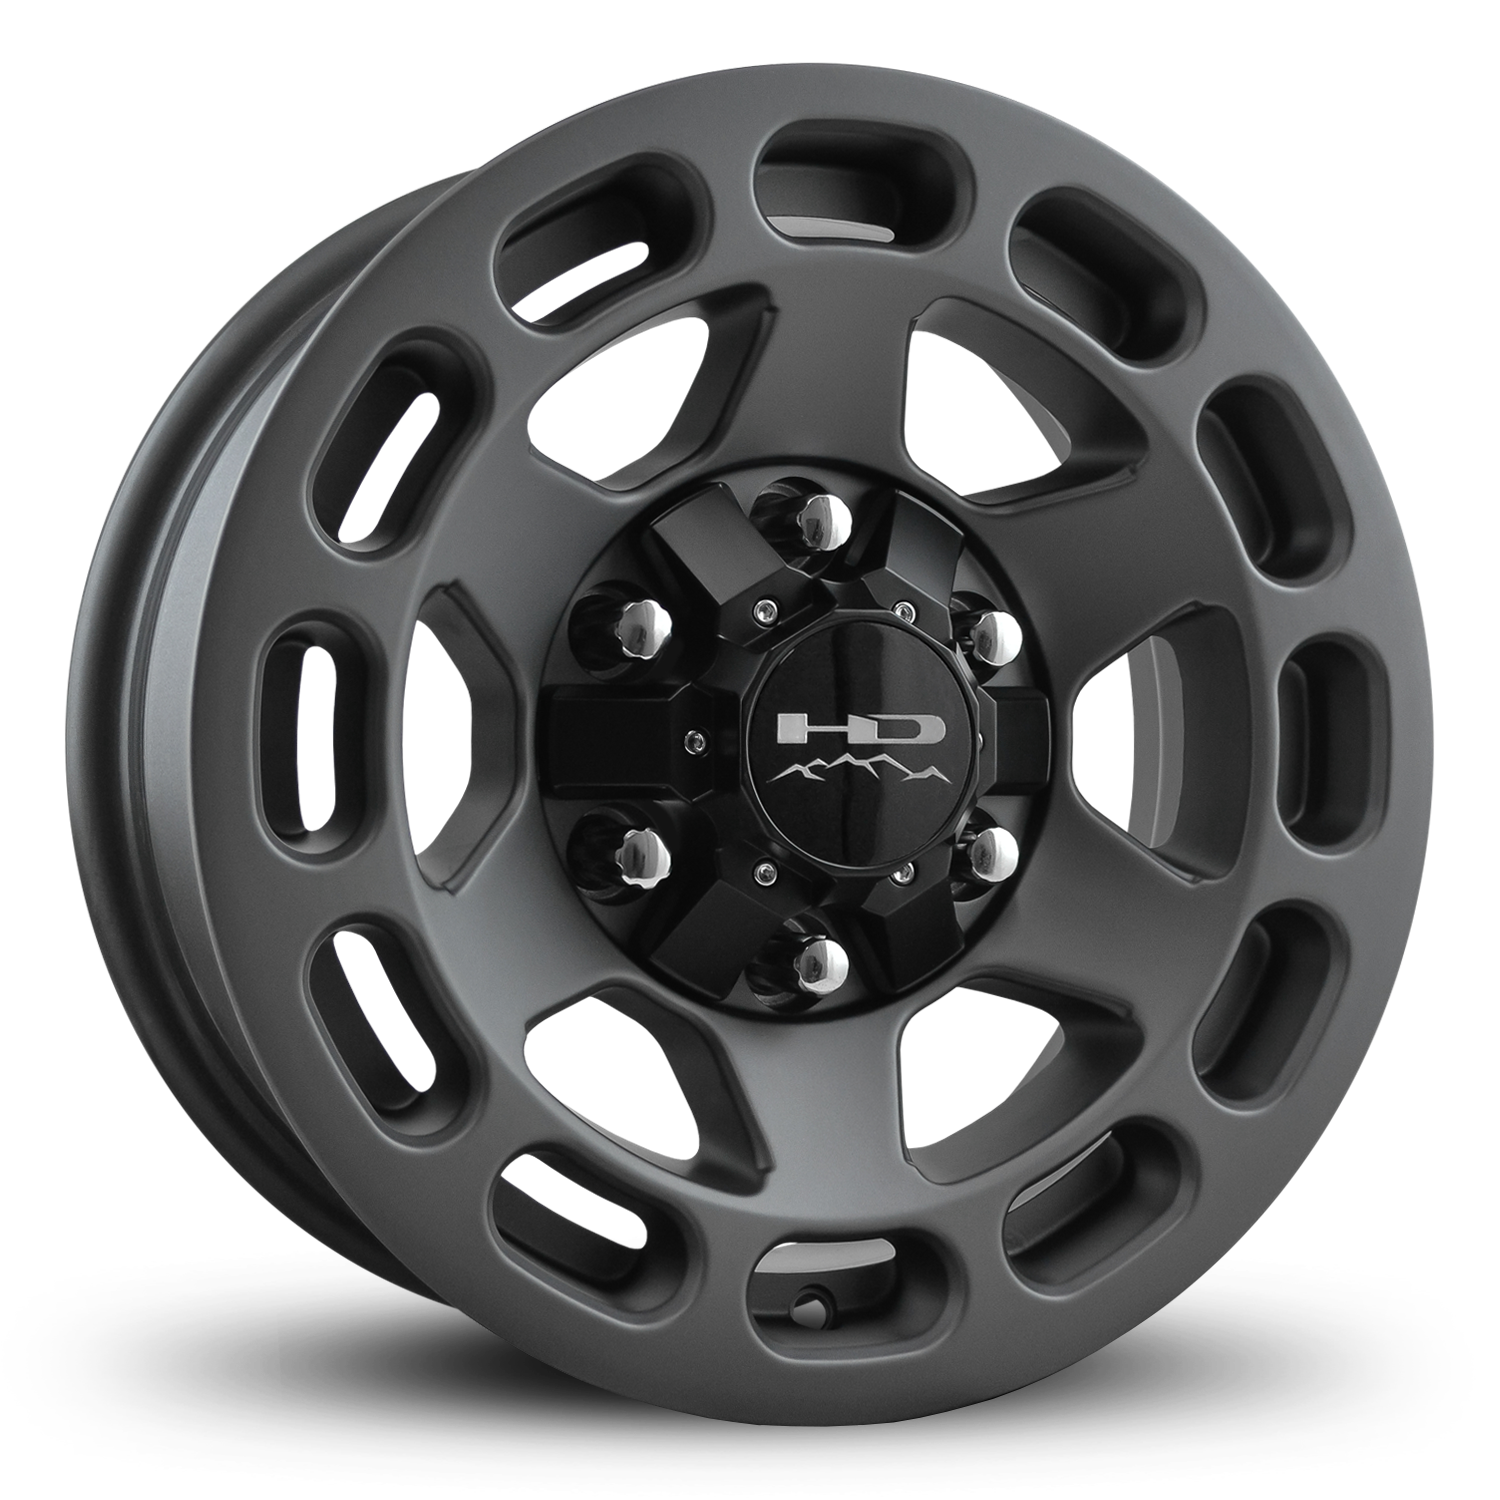 HD Off-Road Patriot Custom Trailer Wheel & Tire packages in 15x6.0 in 6 lug All Satin Grey for Unility, Boat, Car, Construction, Horse, & RV